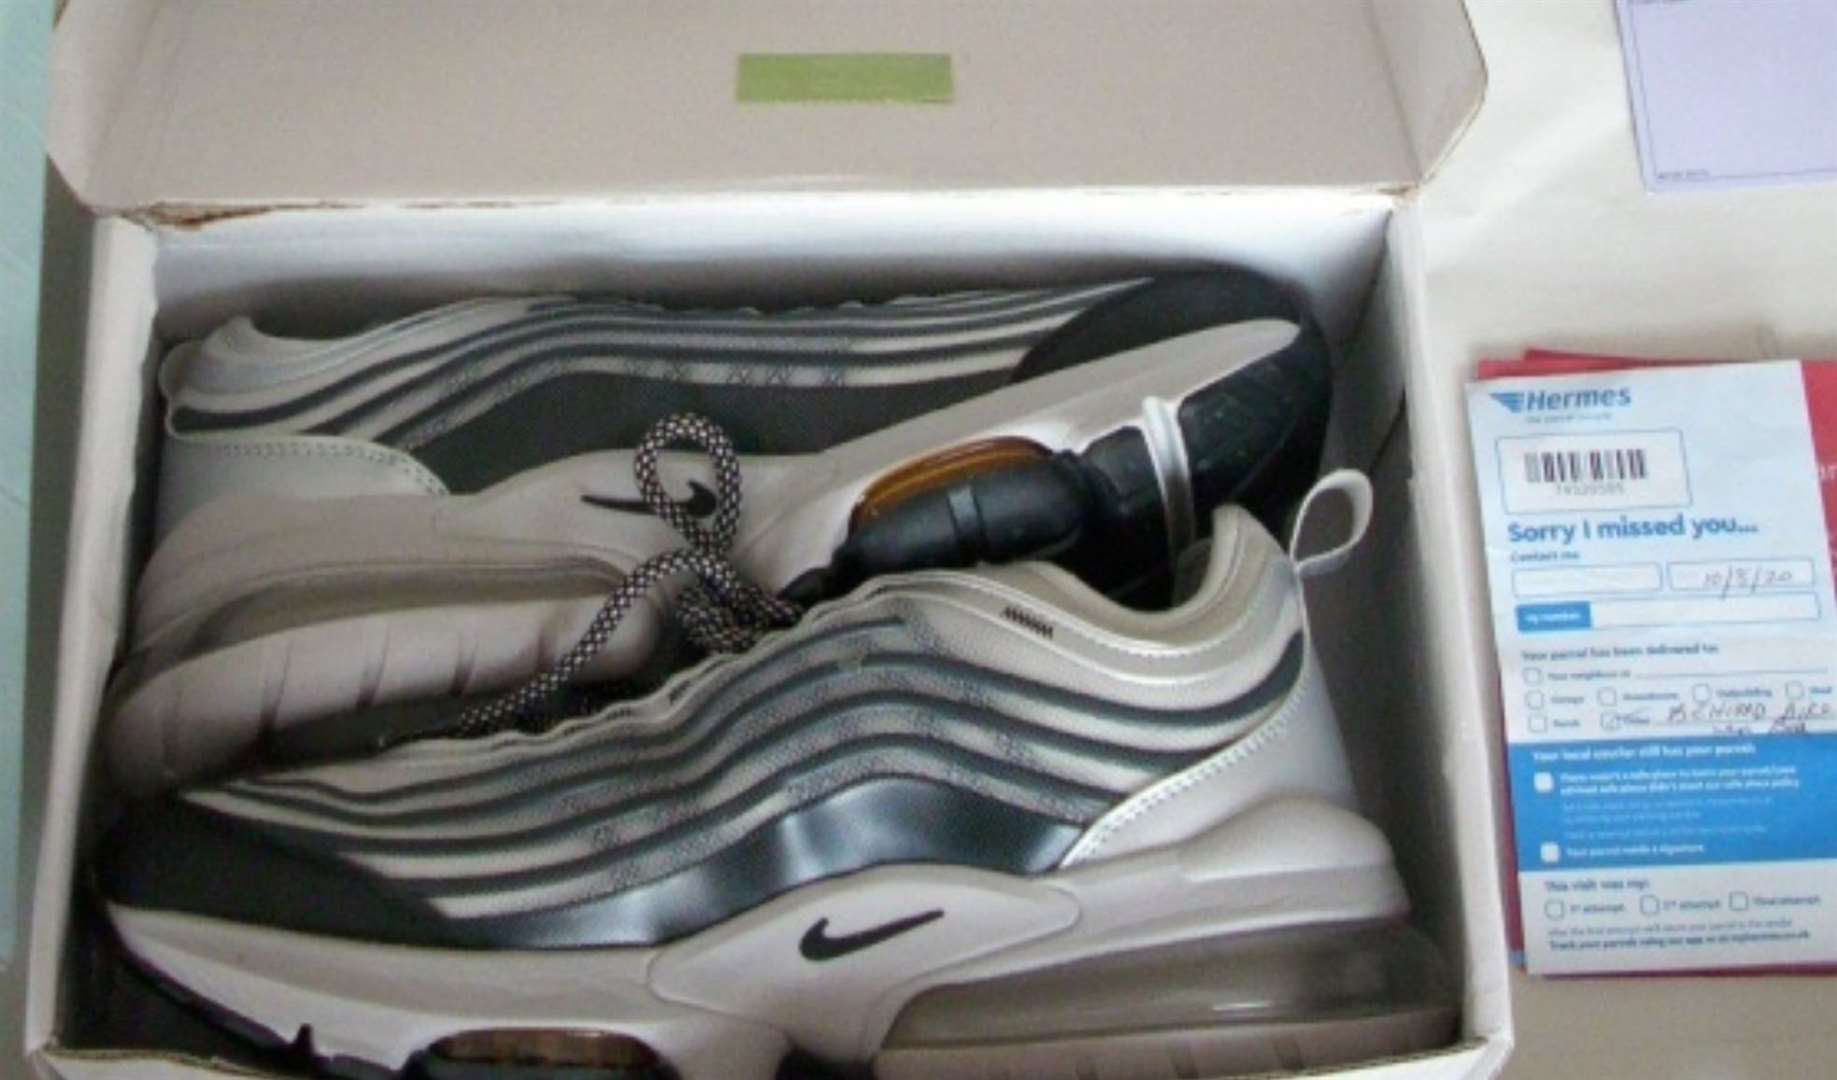 Counterfeit Nike trainers were offered for sale. Picture: Cornwall Council